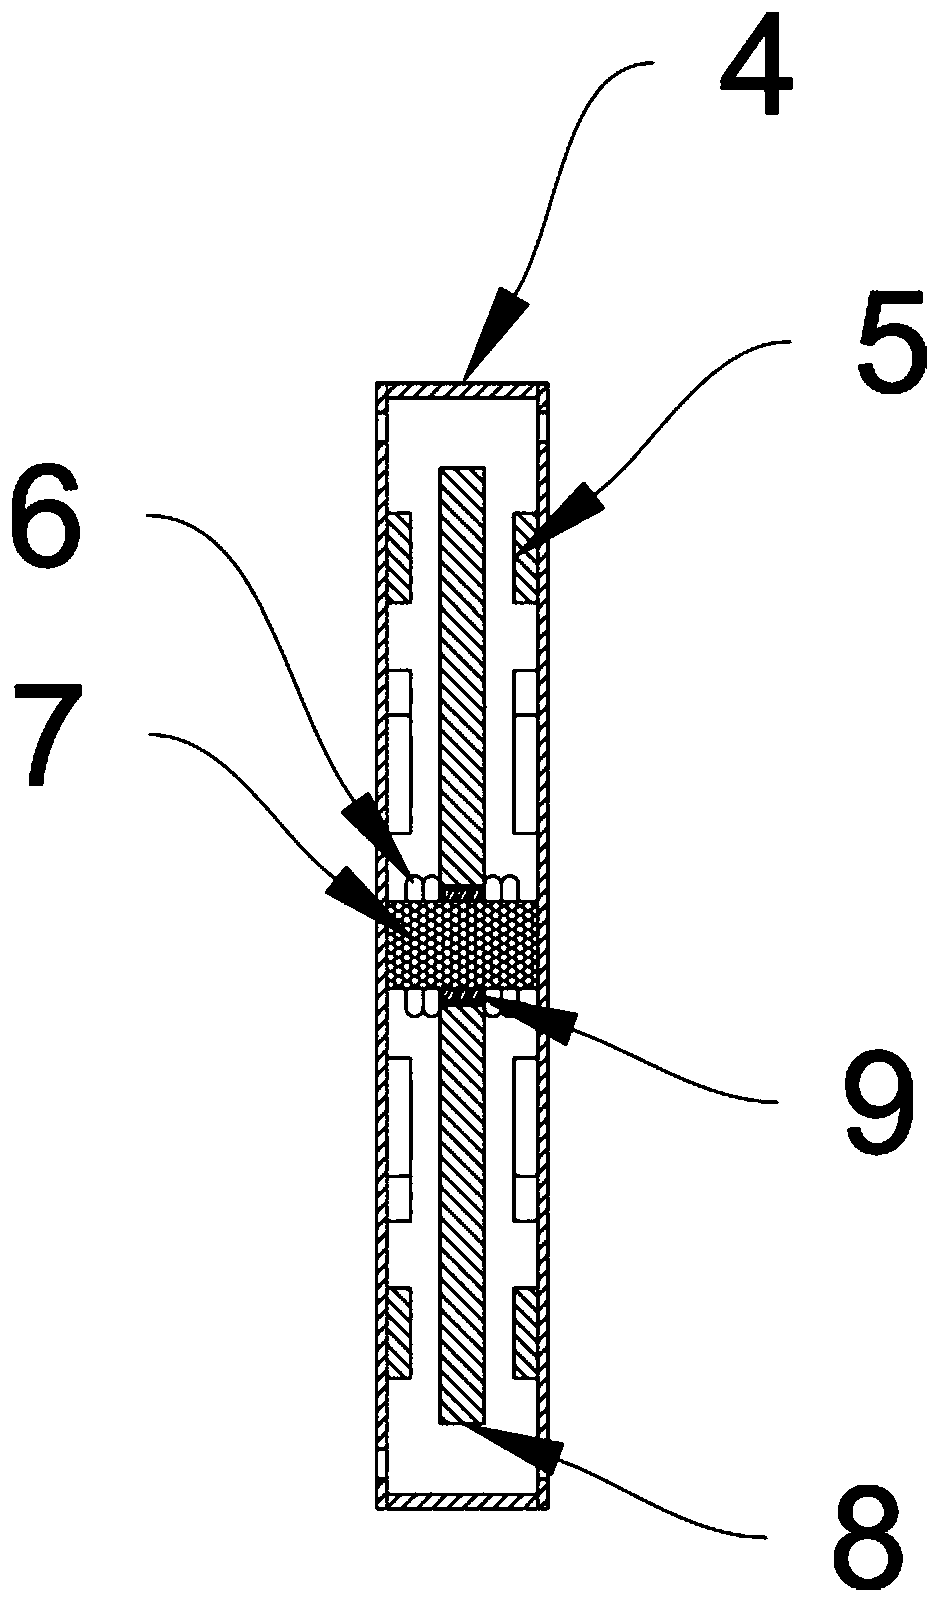 An anti-galling torsional eddy current mass damper and its optimization method